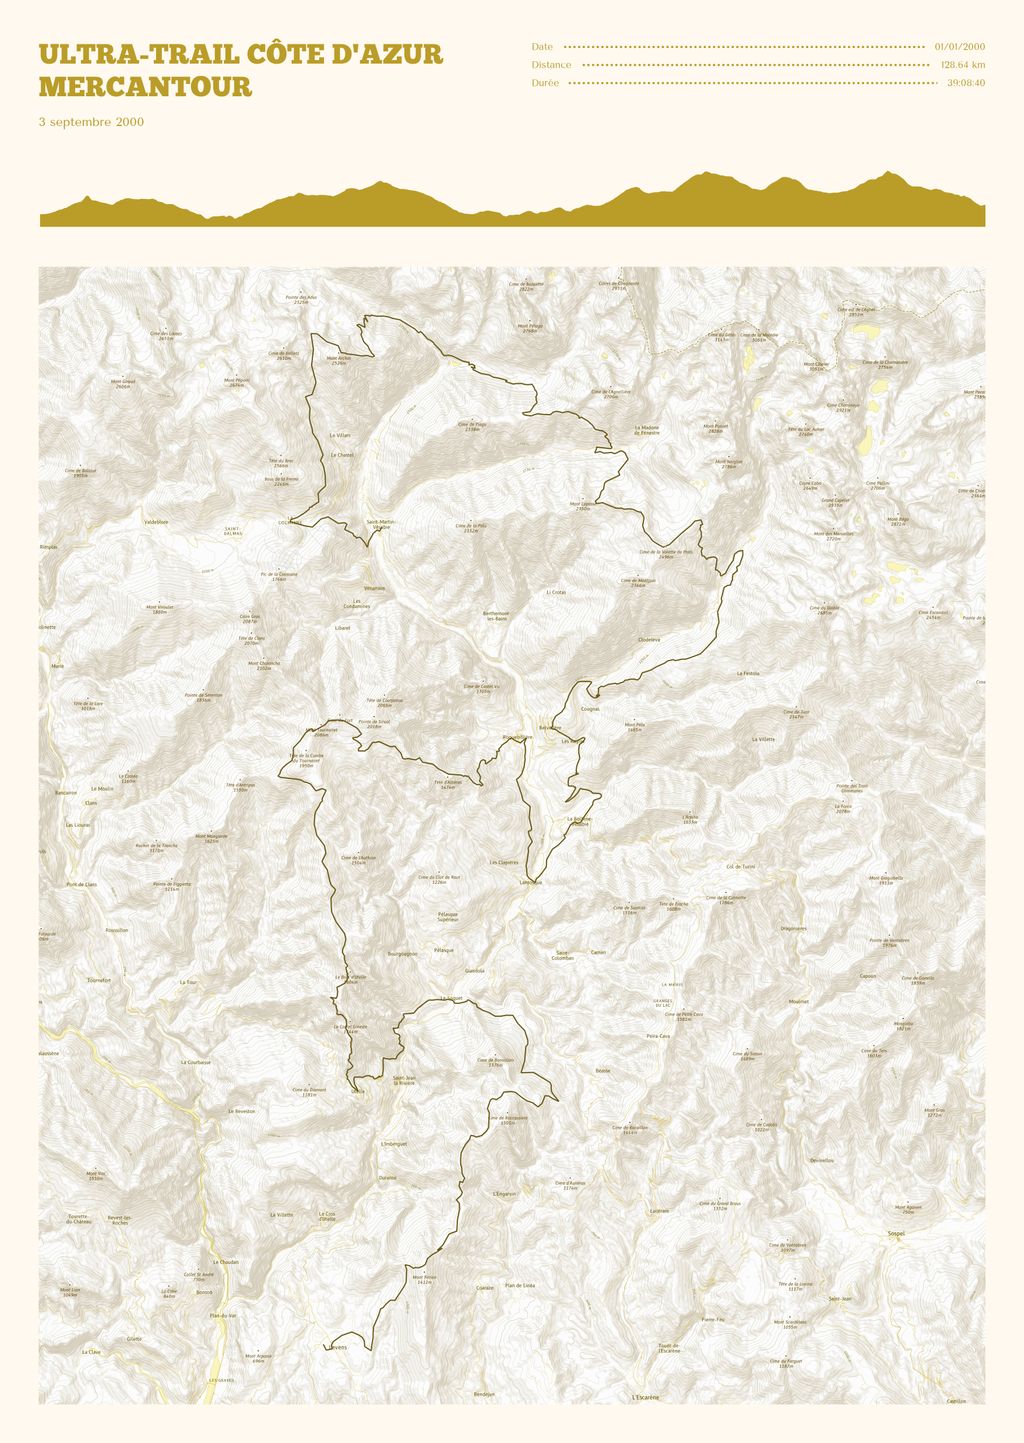 Map poster of the Ultra-Trail Côte d'Azur Mercantour